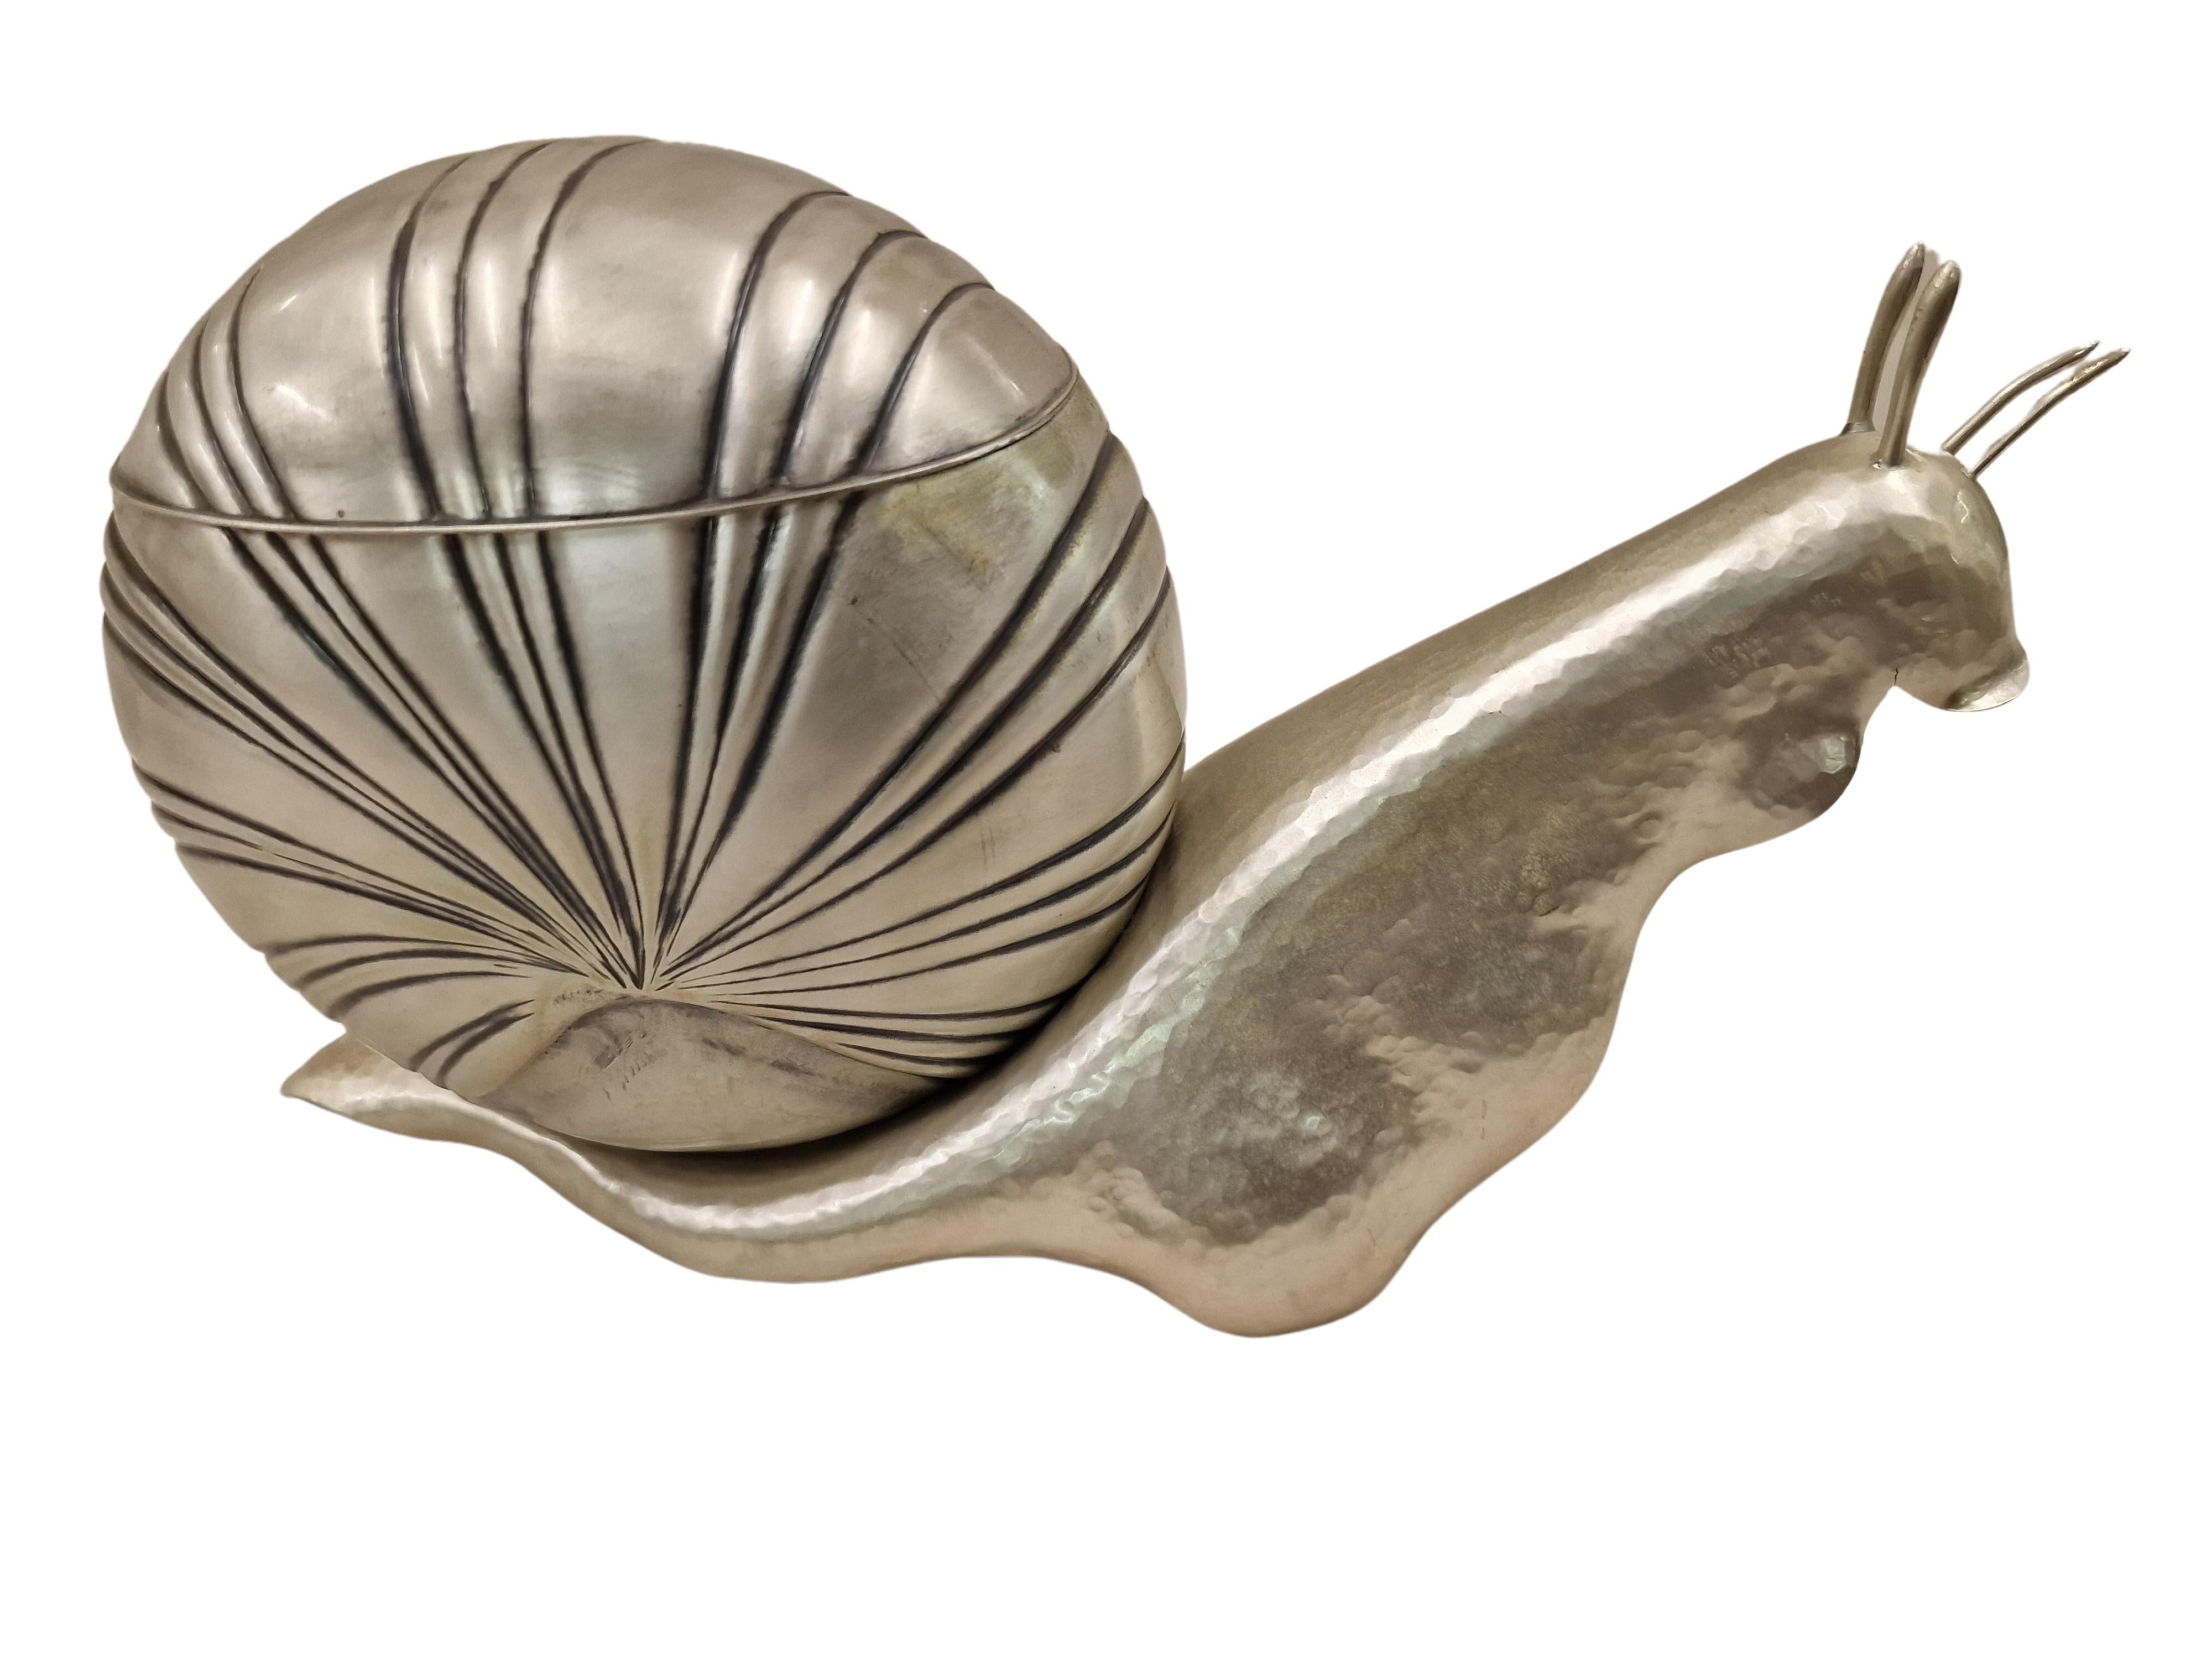 Hammered Ice bucket in form of a snail, silver plated, vintage 1960/70 Mid-Century, Italy